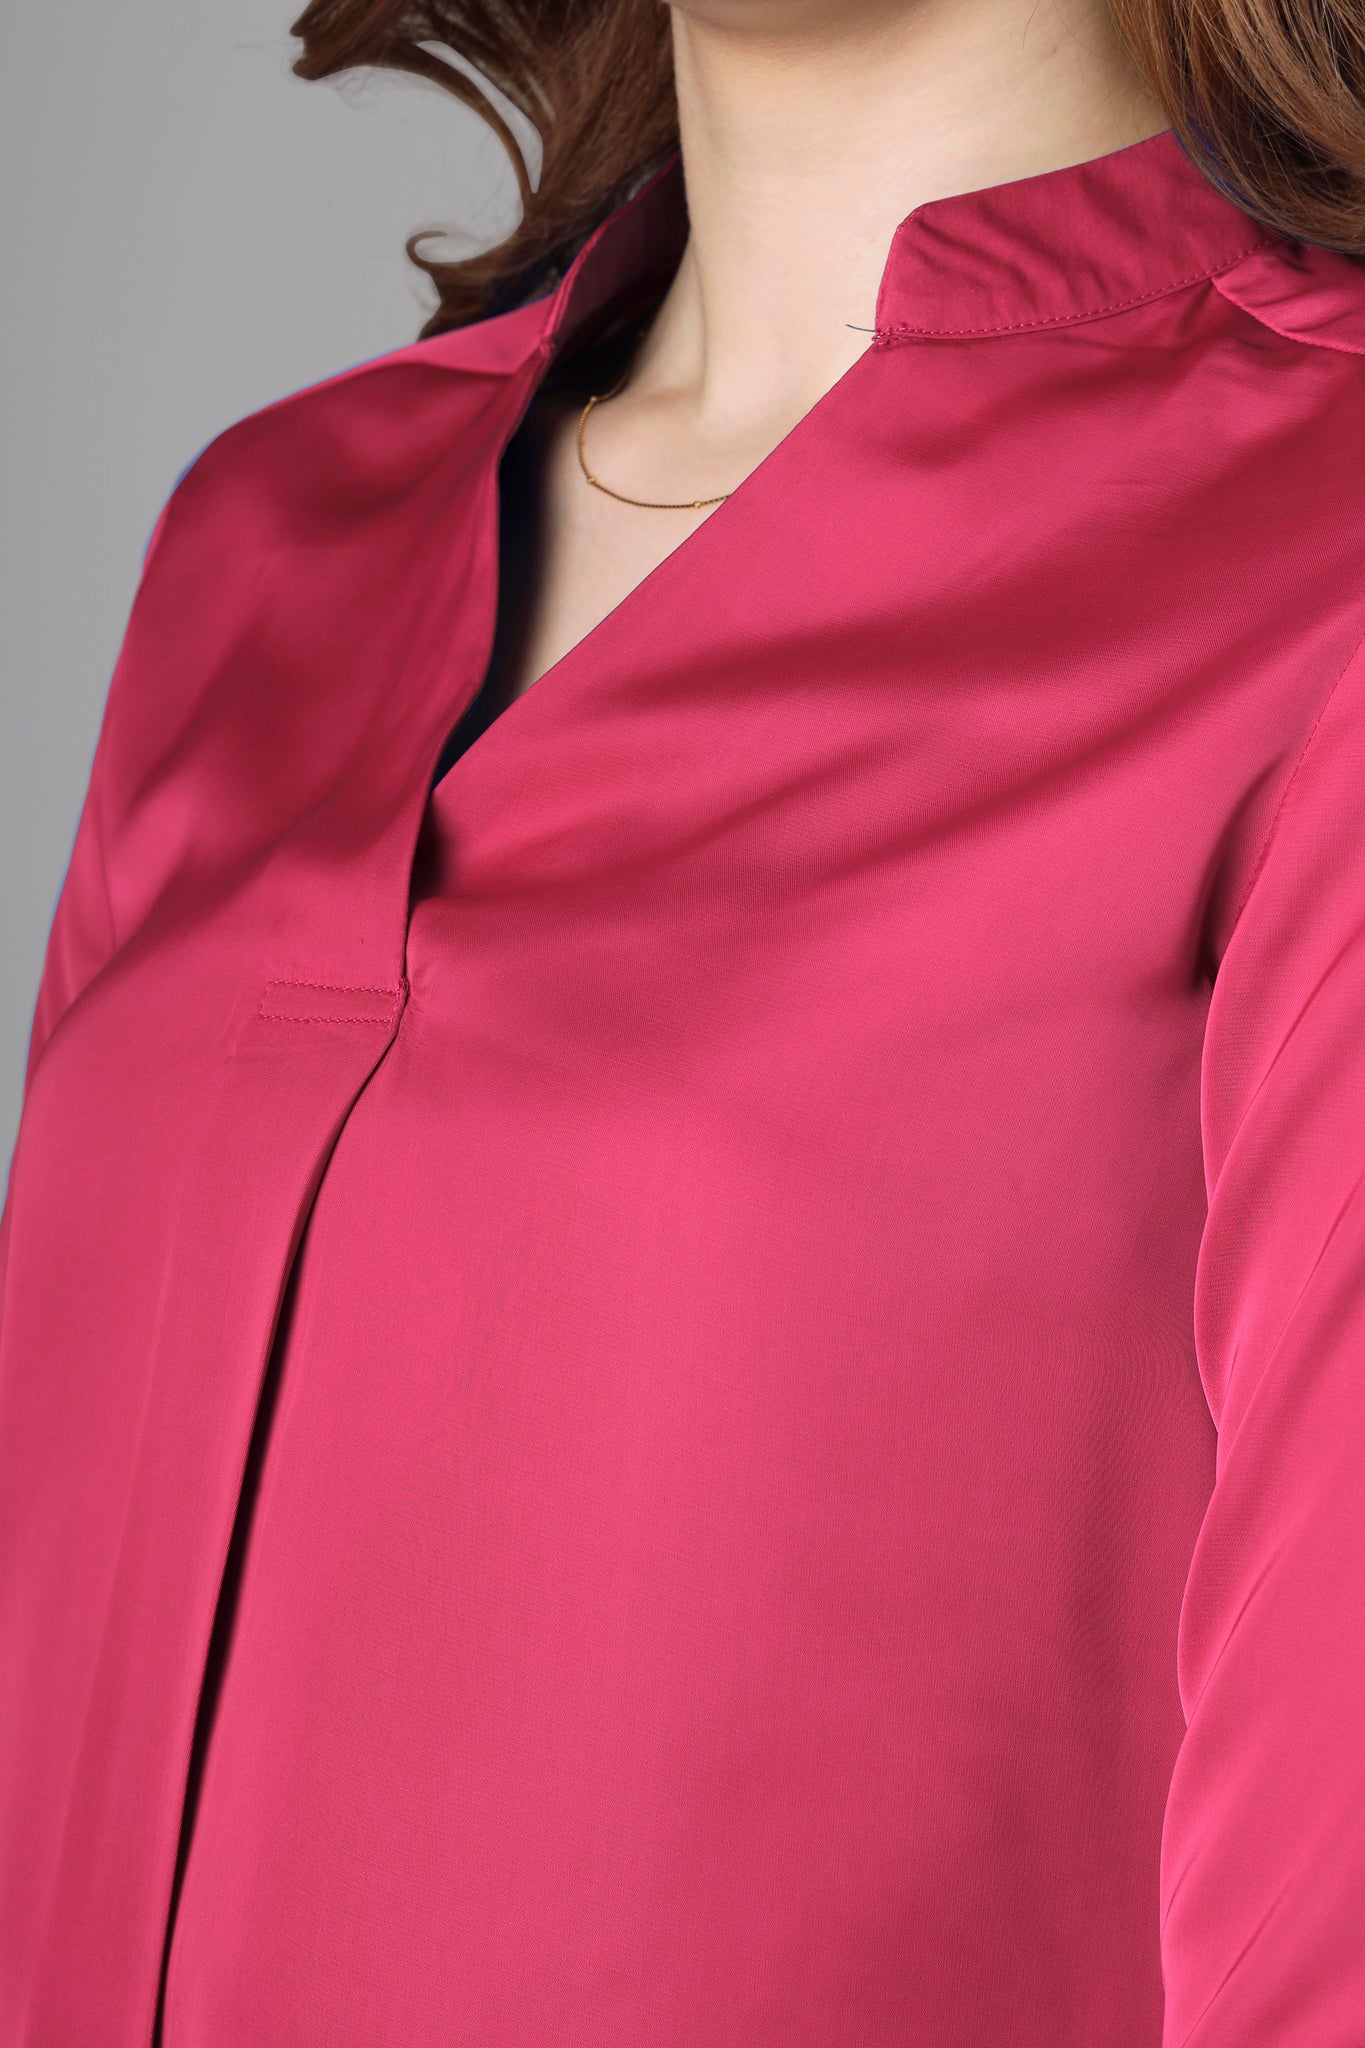 Classic Hot Pink Top For Women